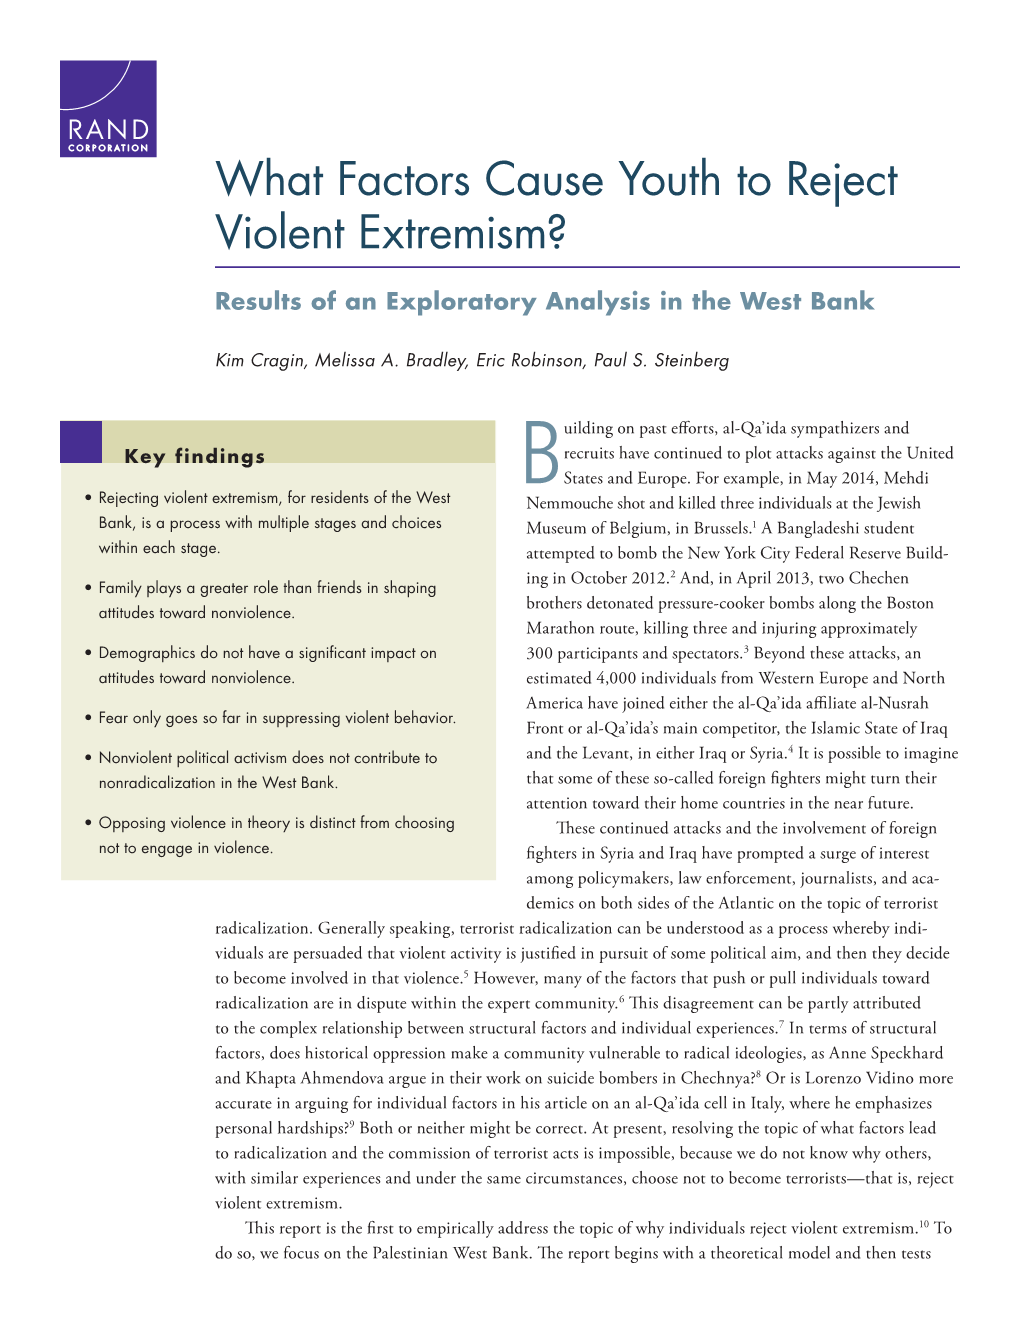 What Factors Cause Youth to Reject Violent Extremism?